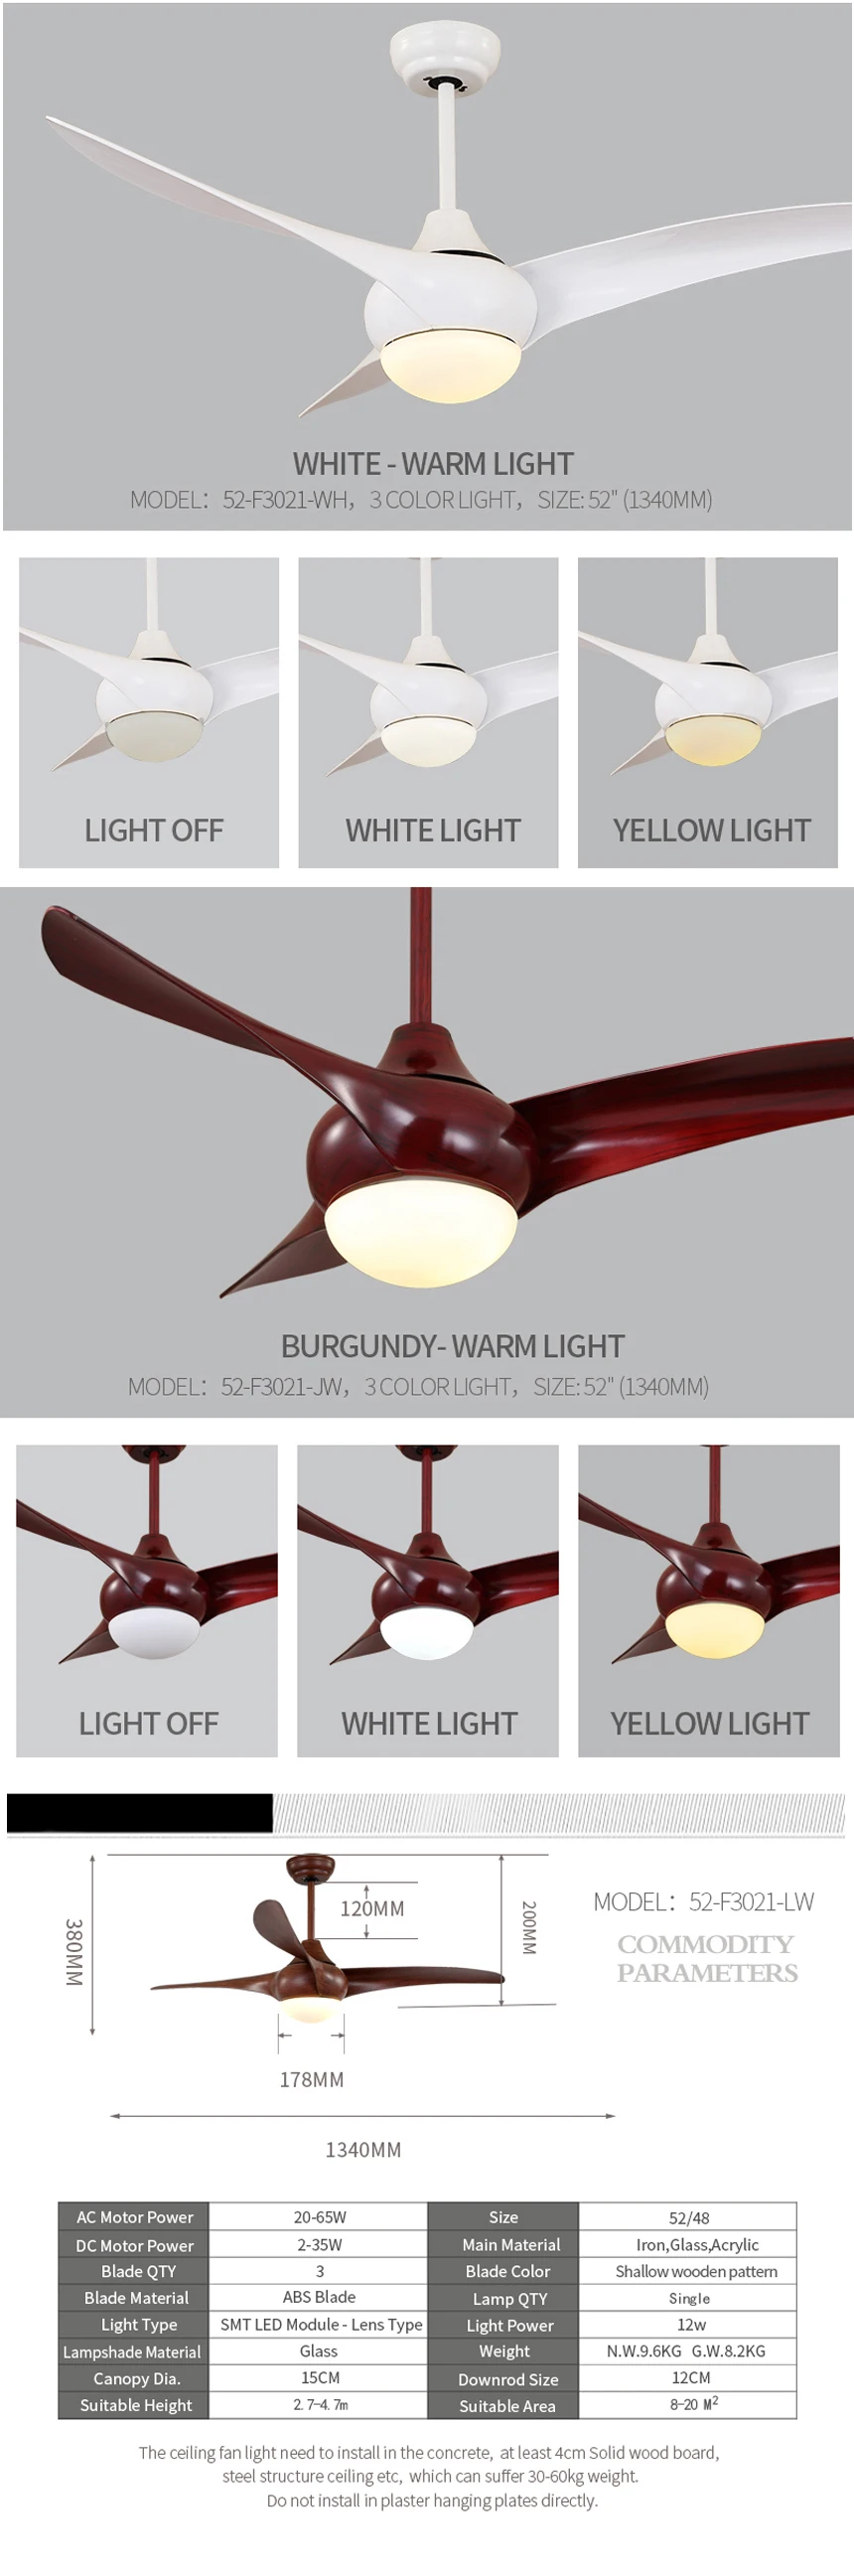 Most popular 3 blades decorative 52 inch ceiling fan with led light